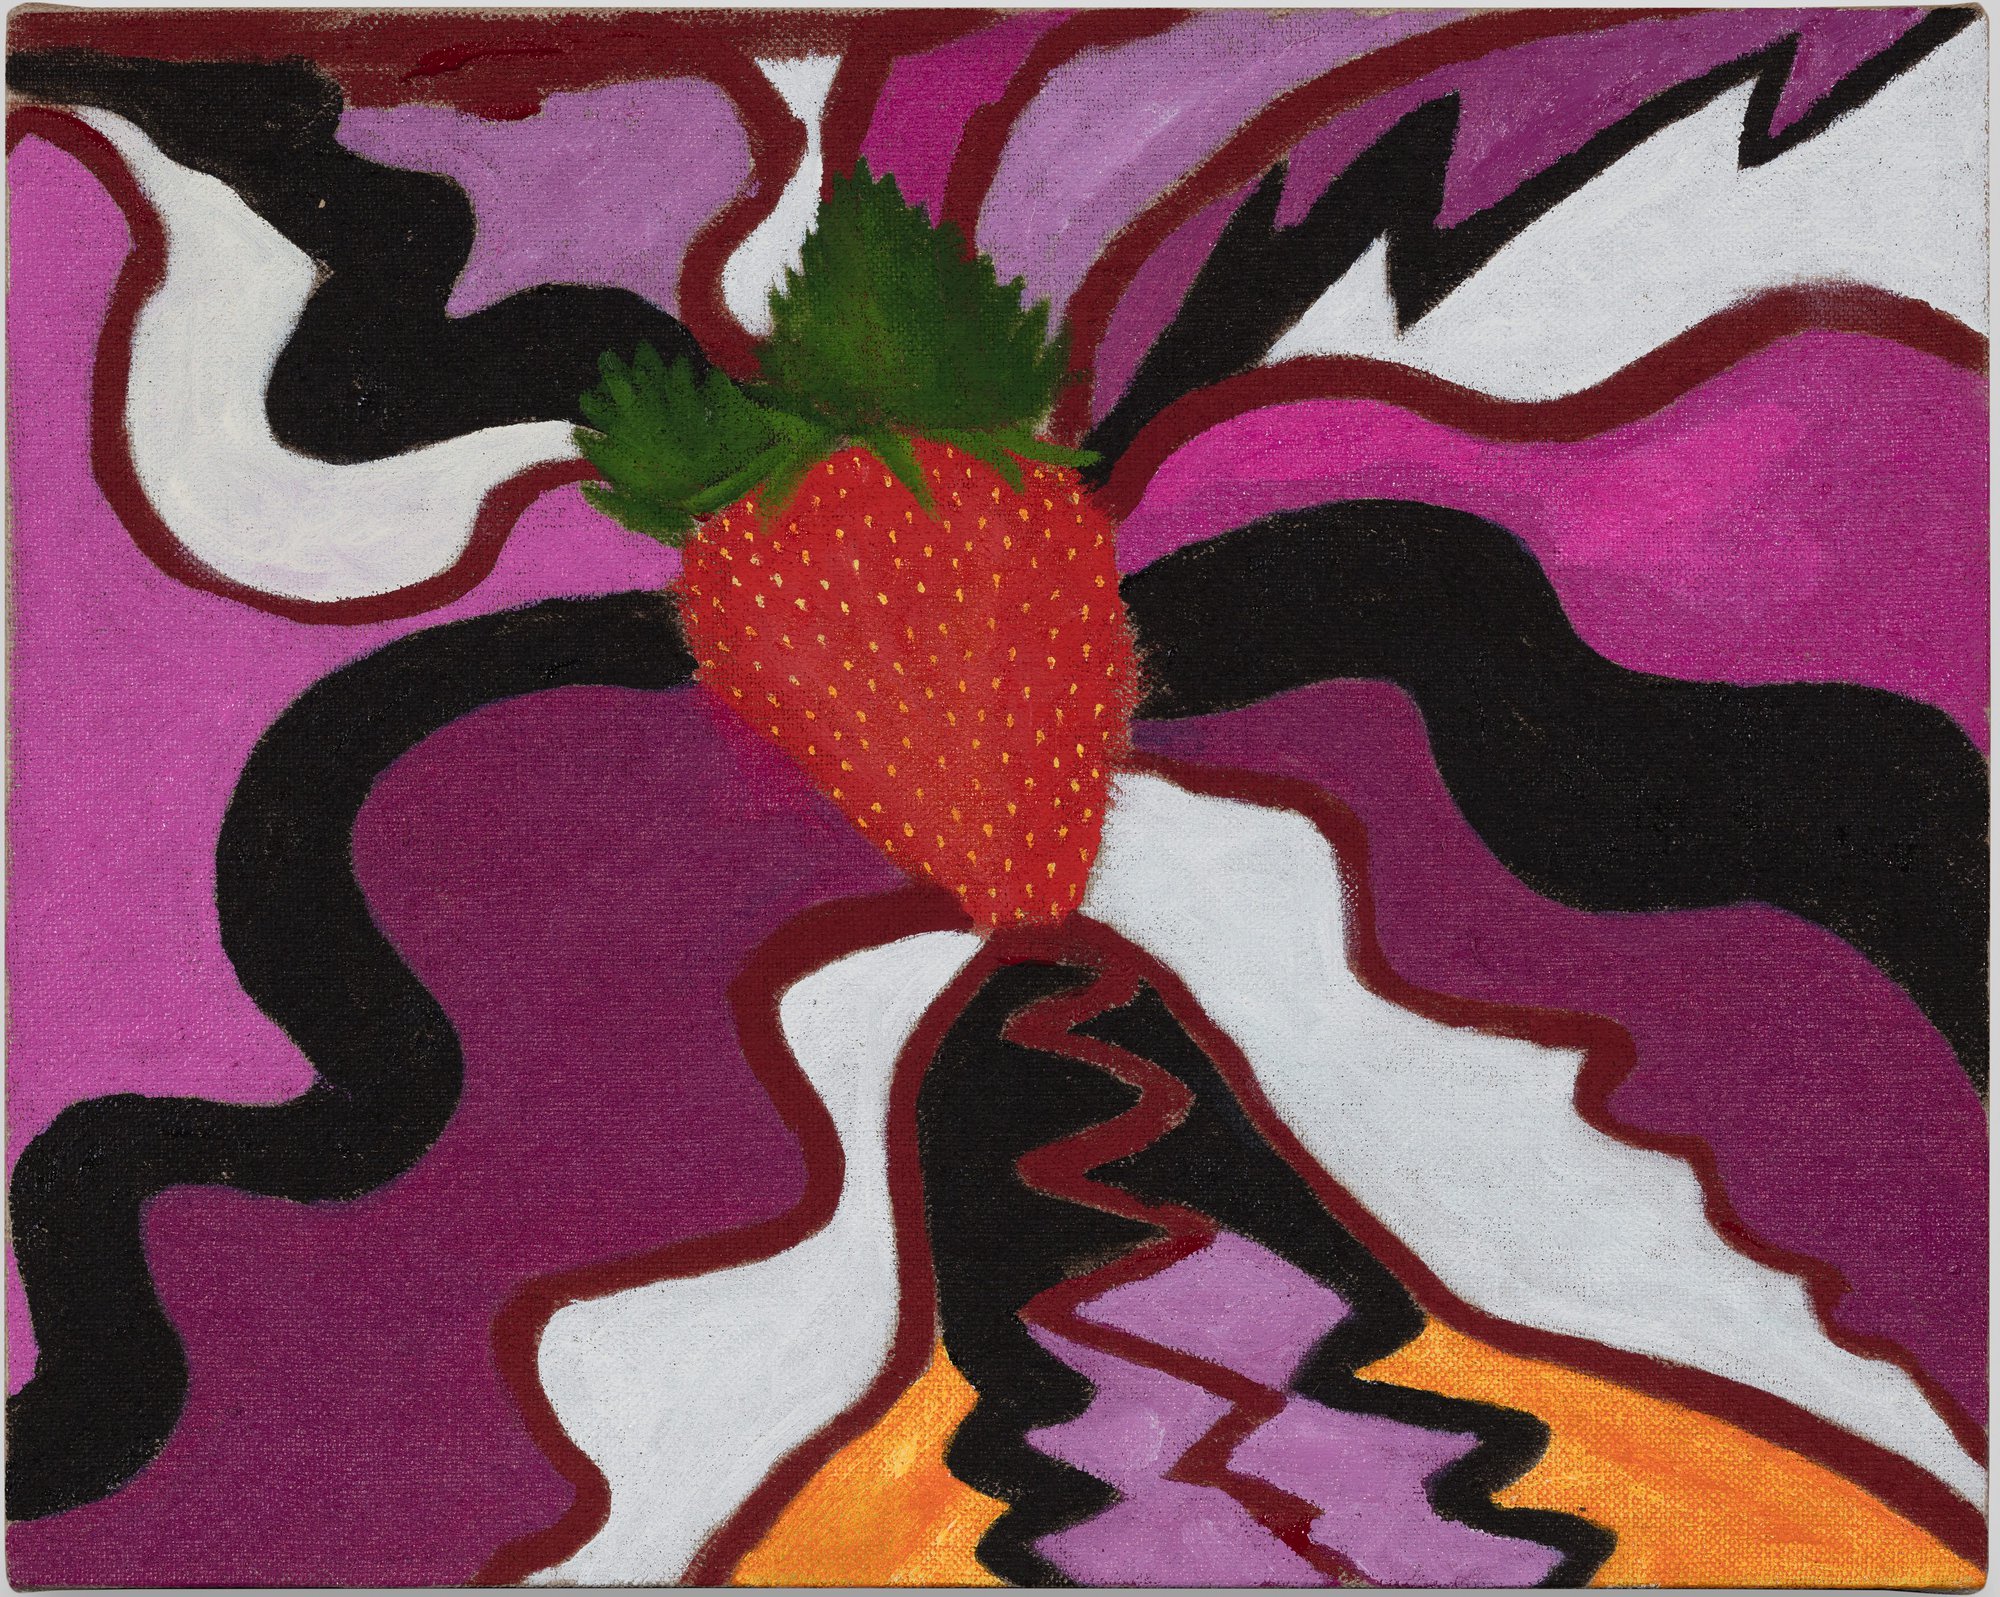 Leidy Churchman, The Between is Ringing (Strawberry) (Braiding Sweetgrass), oil on linen, 20.4 x 25.9 cm, 2020